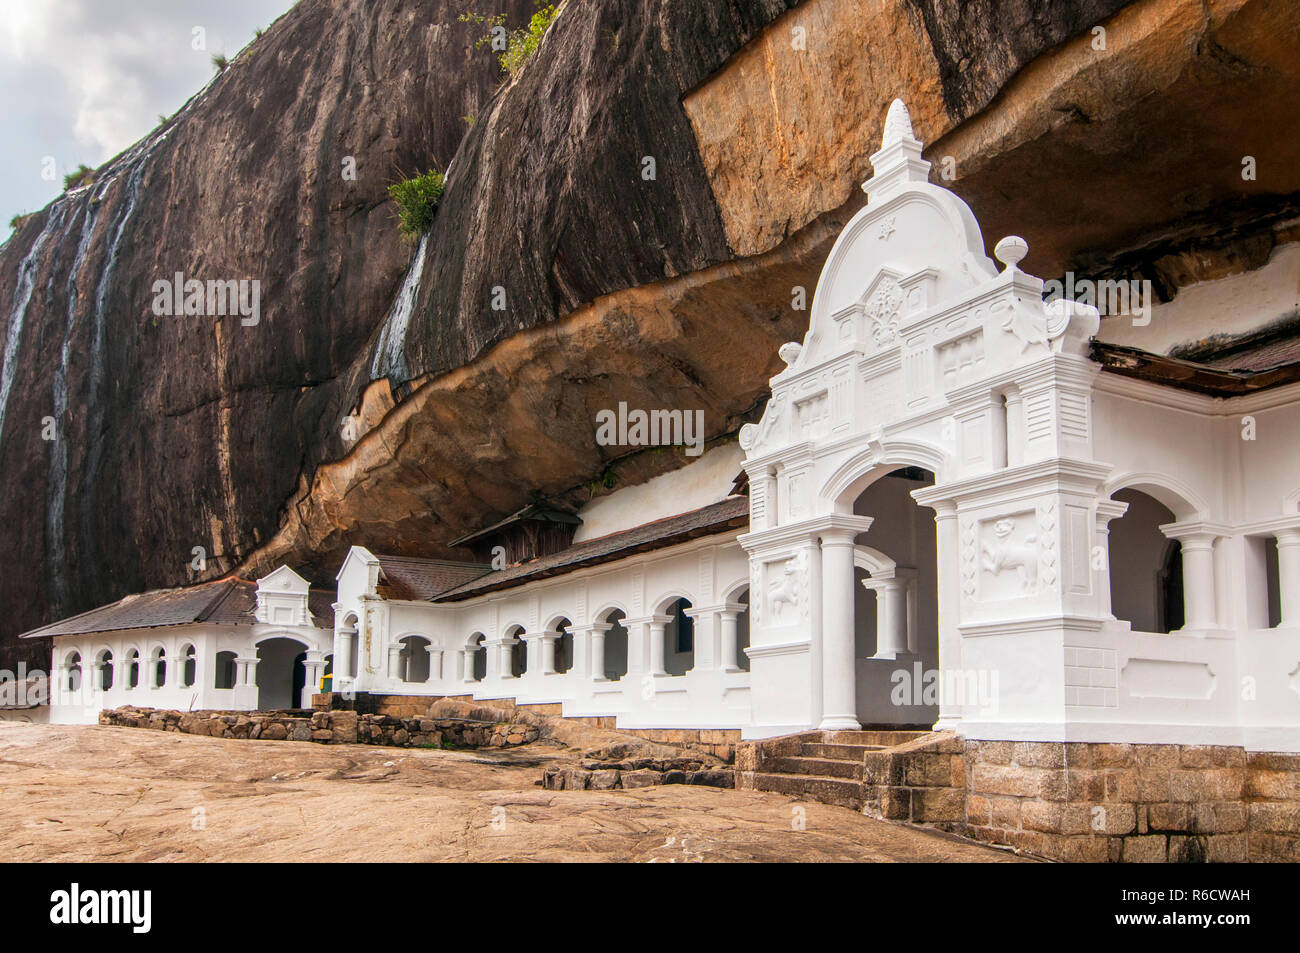 Entrance To Dambulla Golden Temple The Largest And Best-Preserved Cave Temple Complex In Sri Lanka Stock Photo